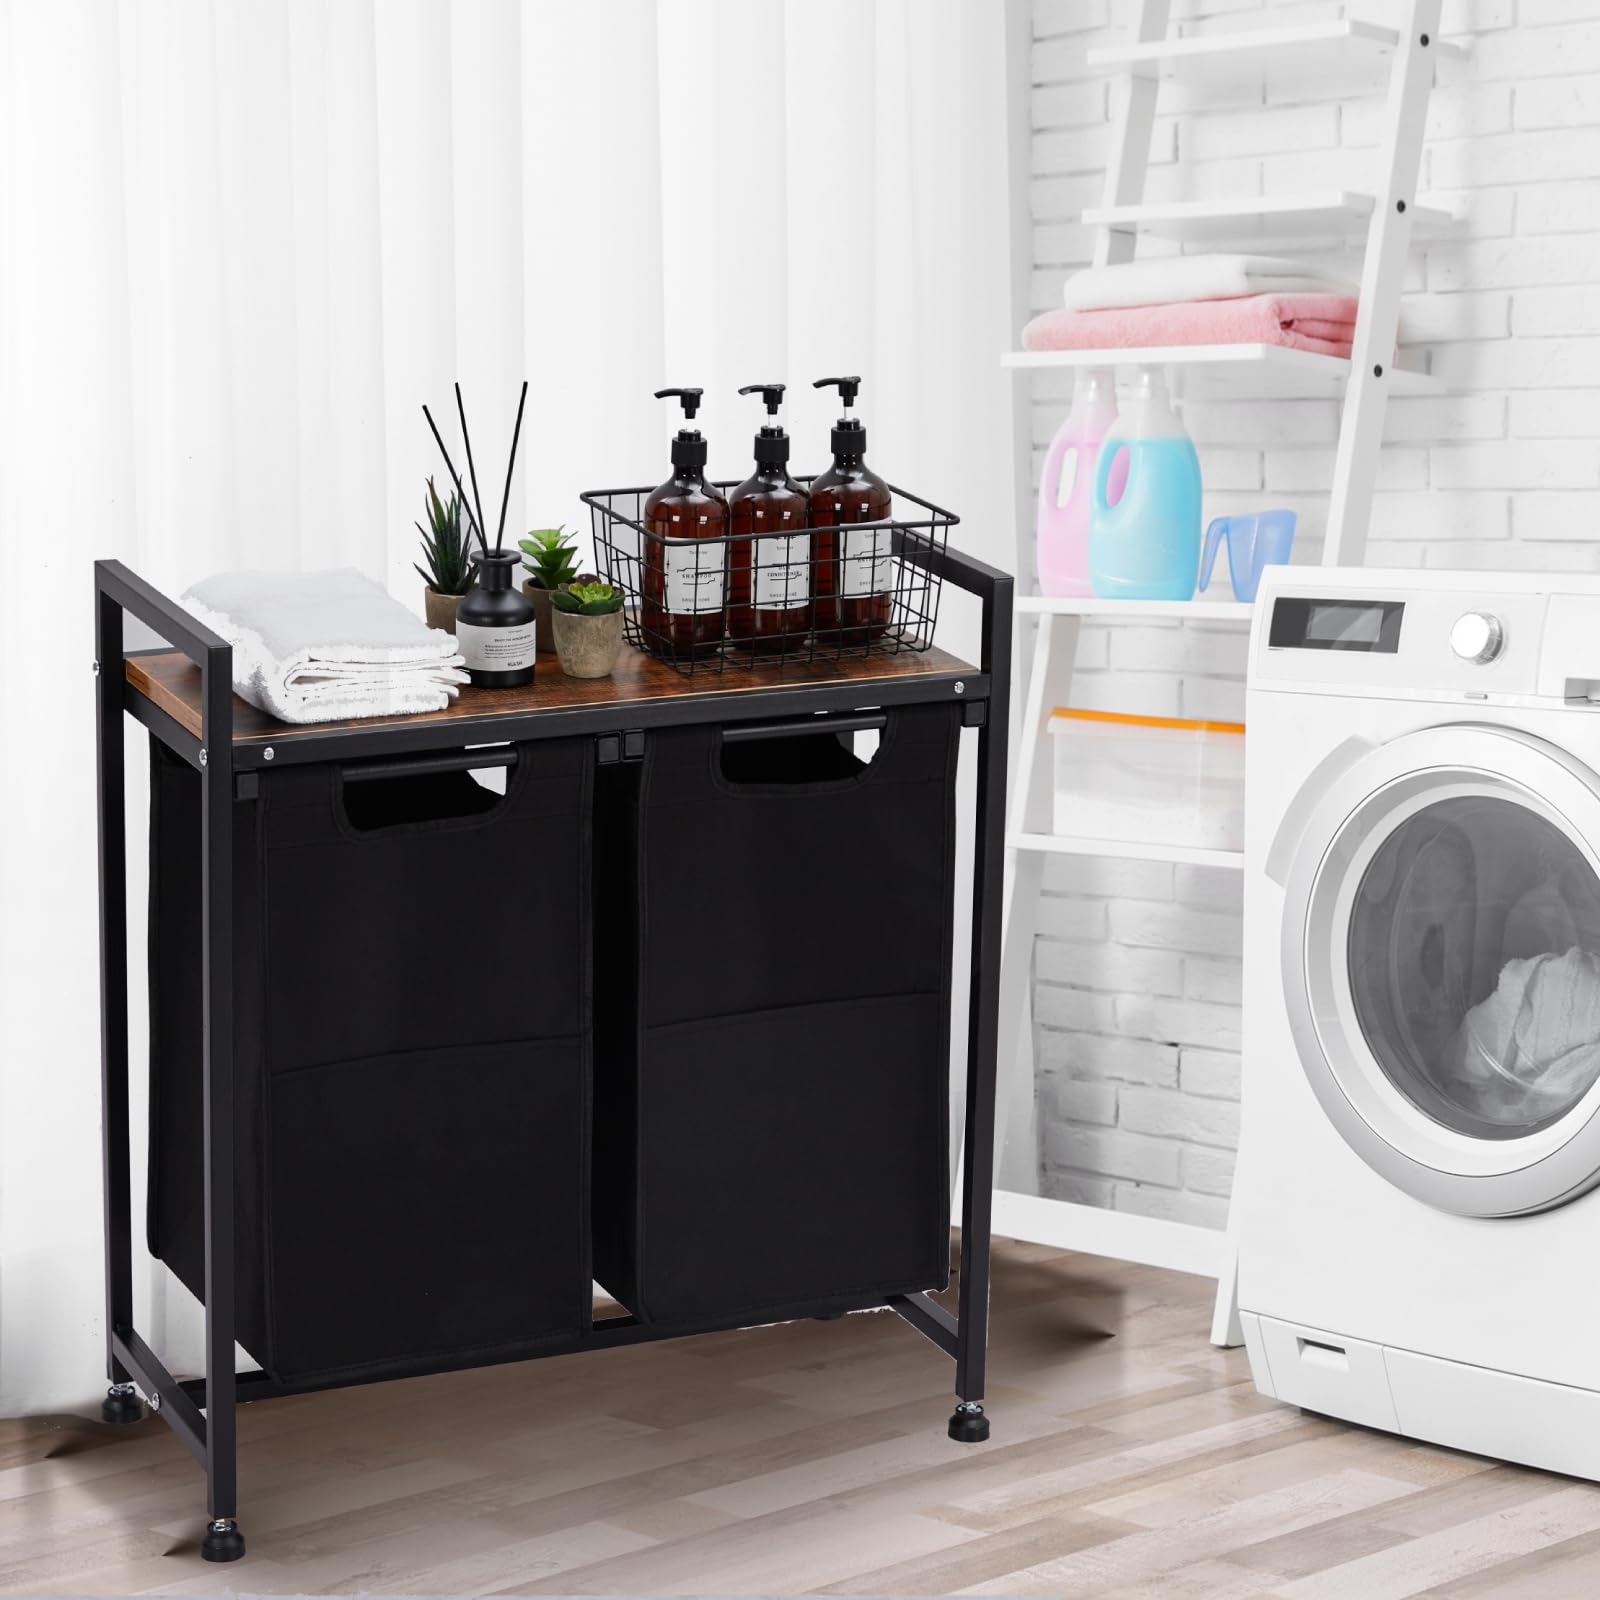 Laundry Hamper, Laundry Bags & 2 Tier Adjustable Storage Shelf, Pull-Out and Removable Oxford Fabric Laundry Baskets, for Home/Hotel Black